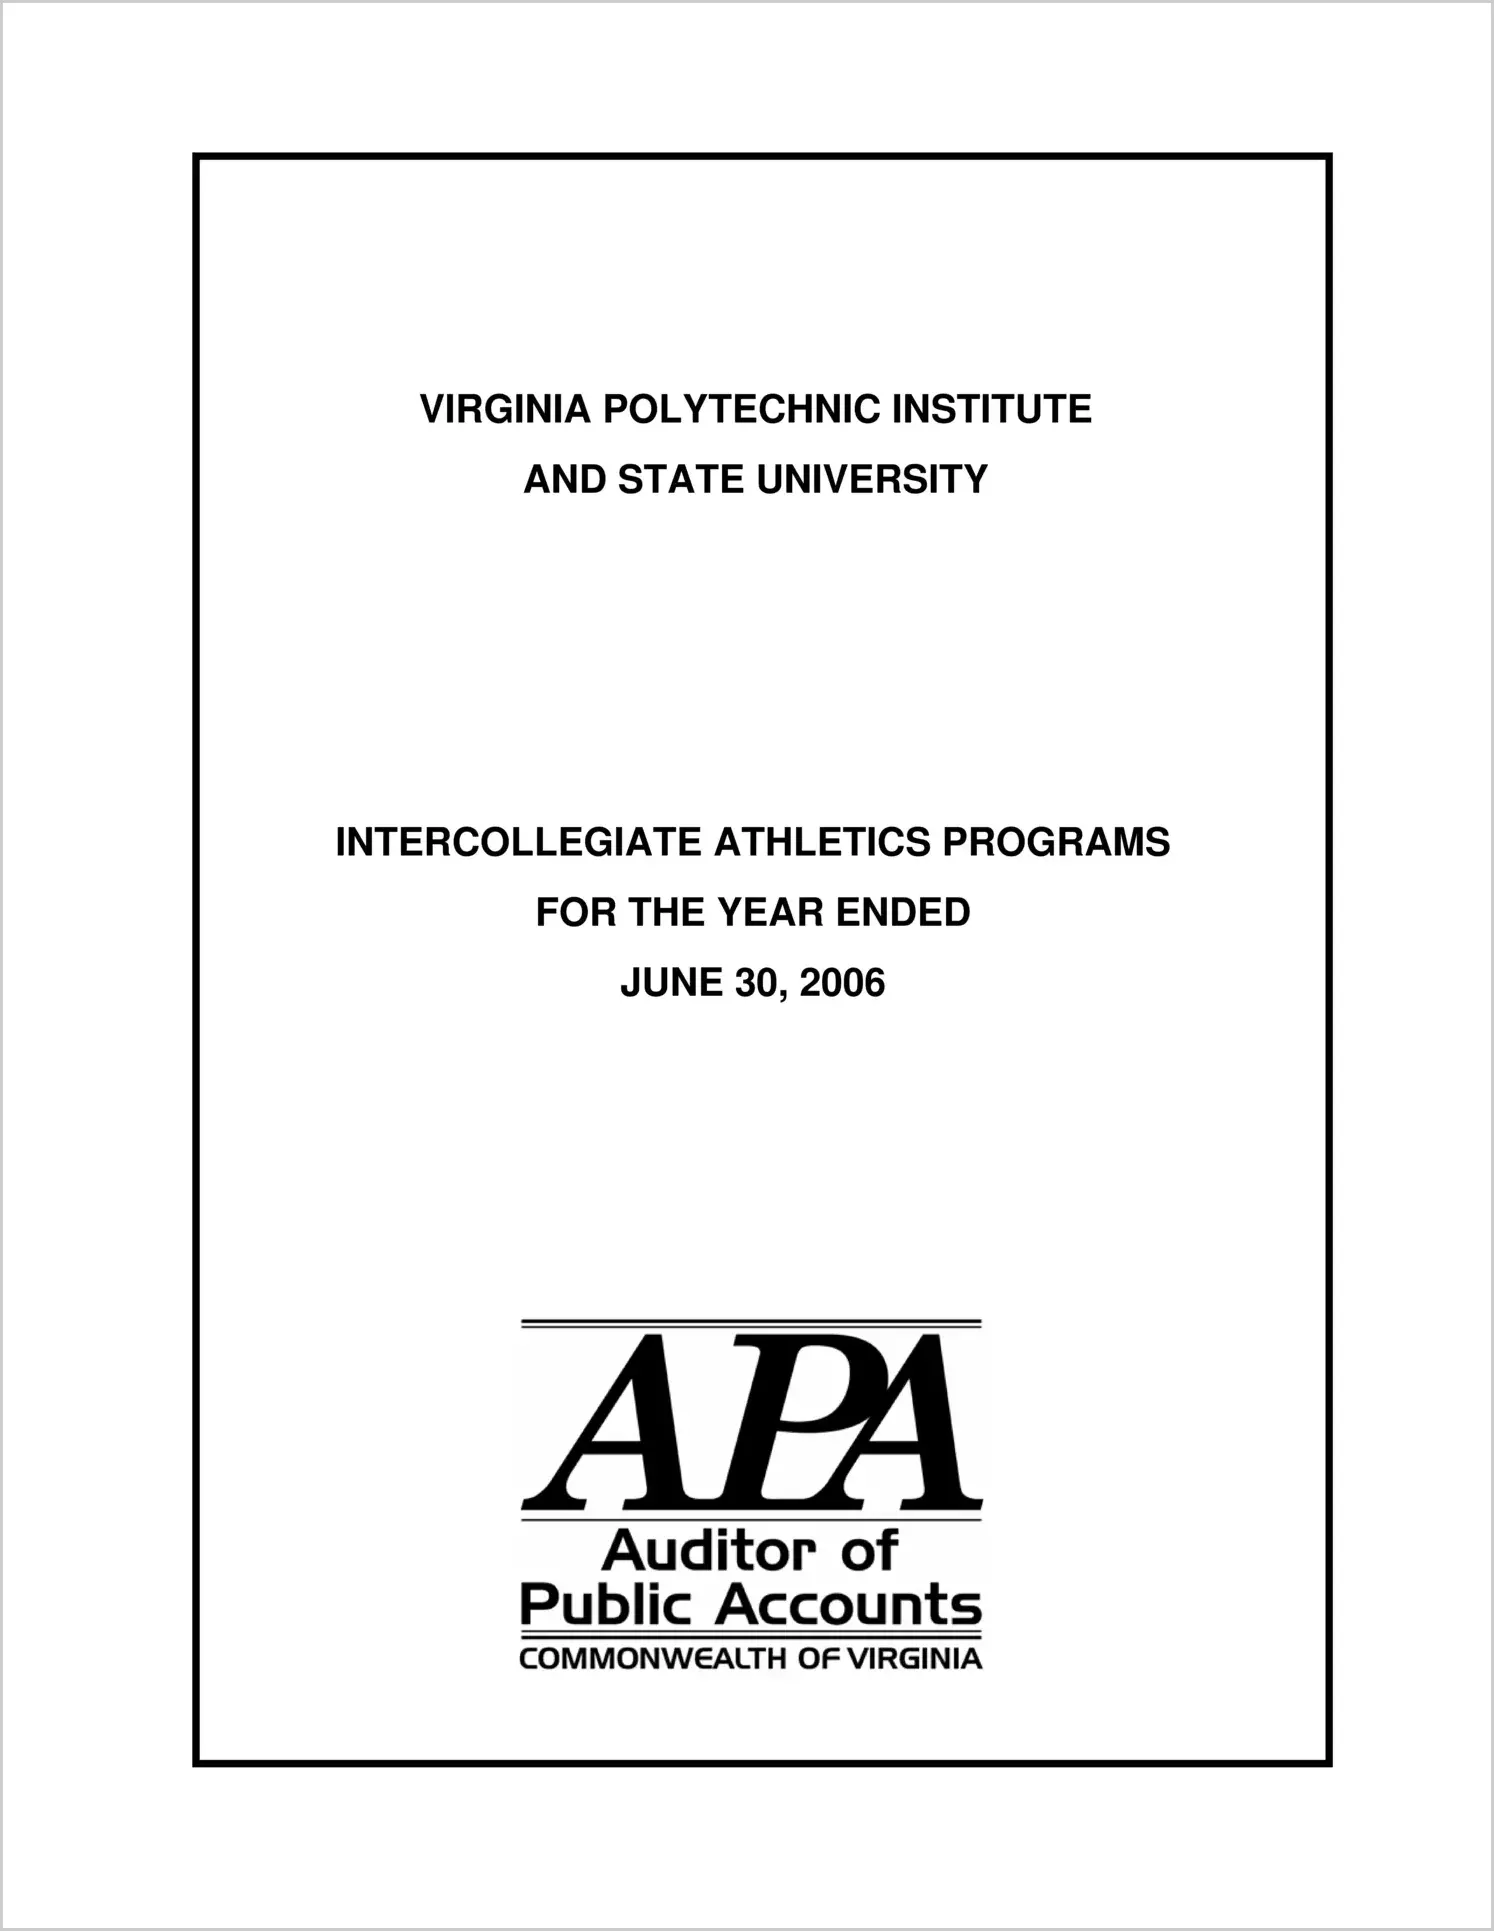 Virginia Polytechnic Institute and State University Intercollegiate Athletic Programs for the year ended June 30, 2006